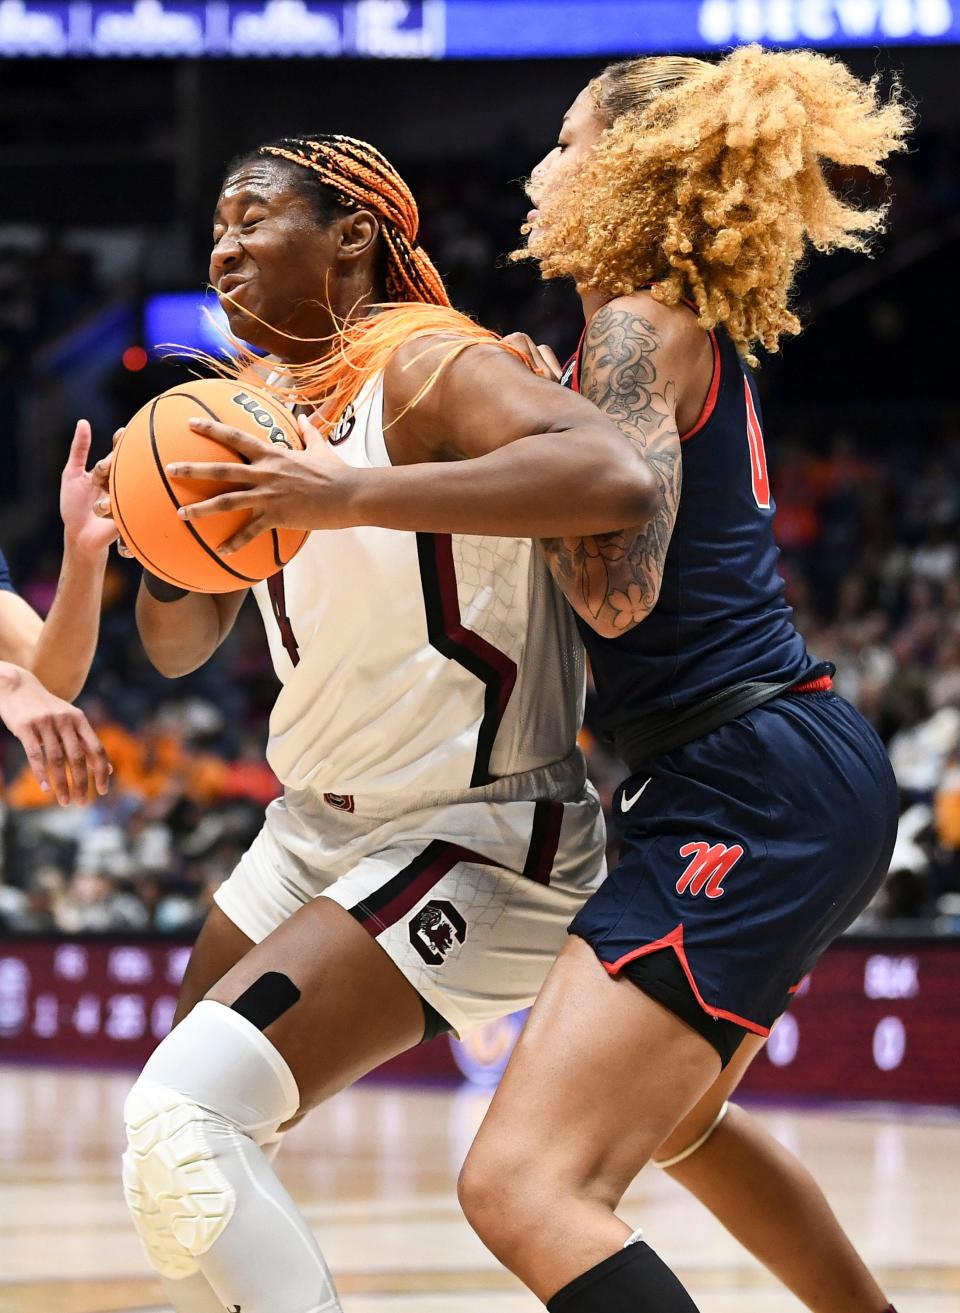 South Carolina forward Aliyah Boston (4) and Ole Miss center Shakira Austin (0) compete as the teams face off in their semifinal game in the SEC tournament at Bridgestone Arena in Nashville, Tenn., Saturday, March 5, 2022.